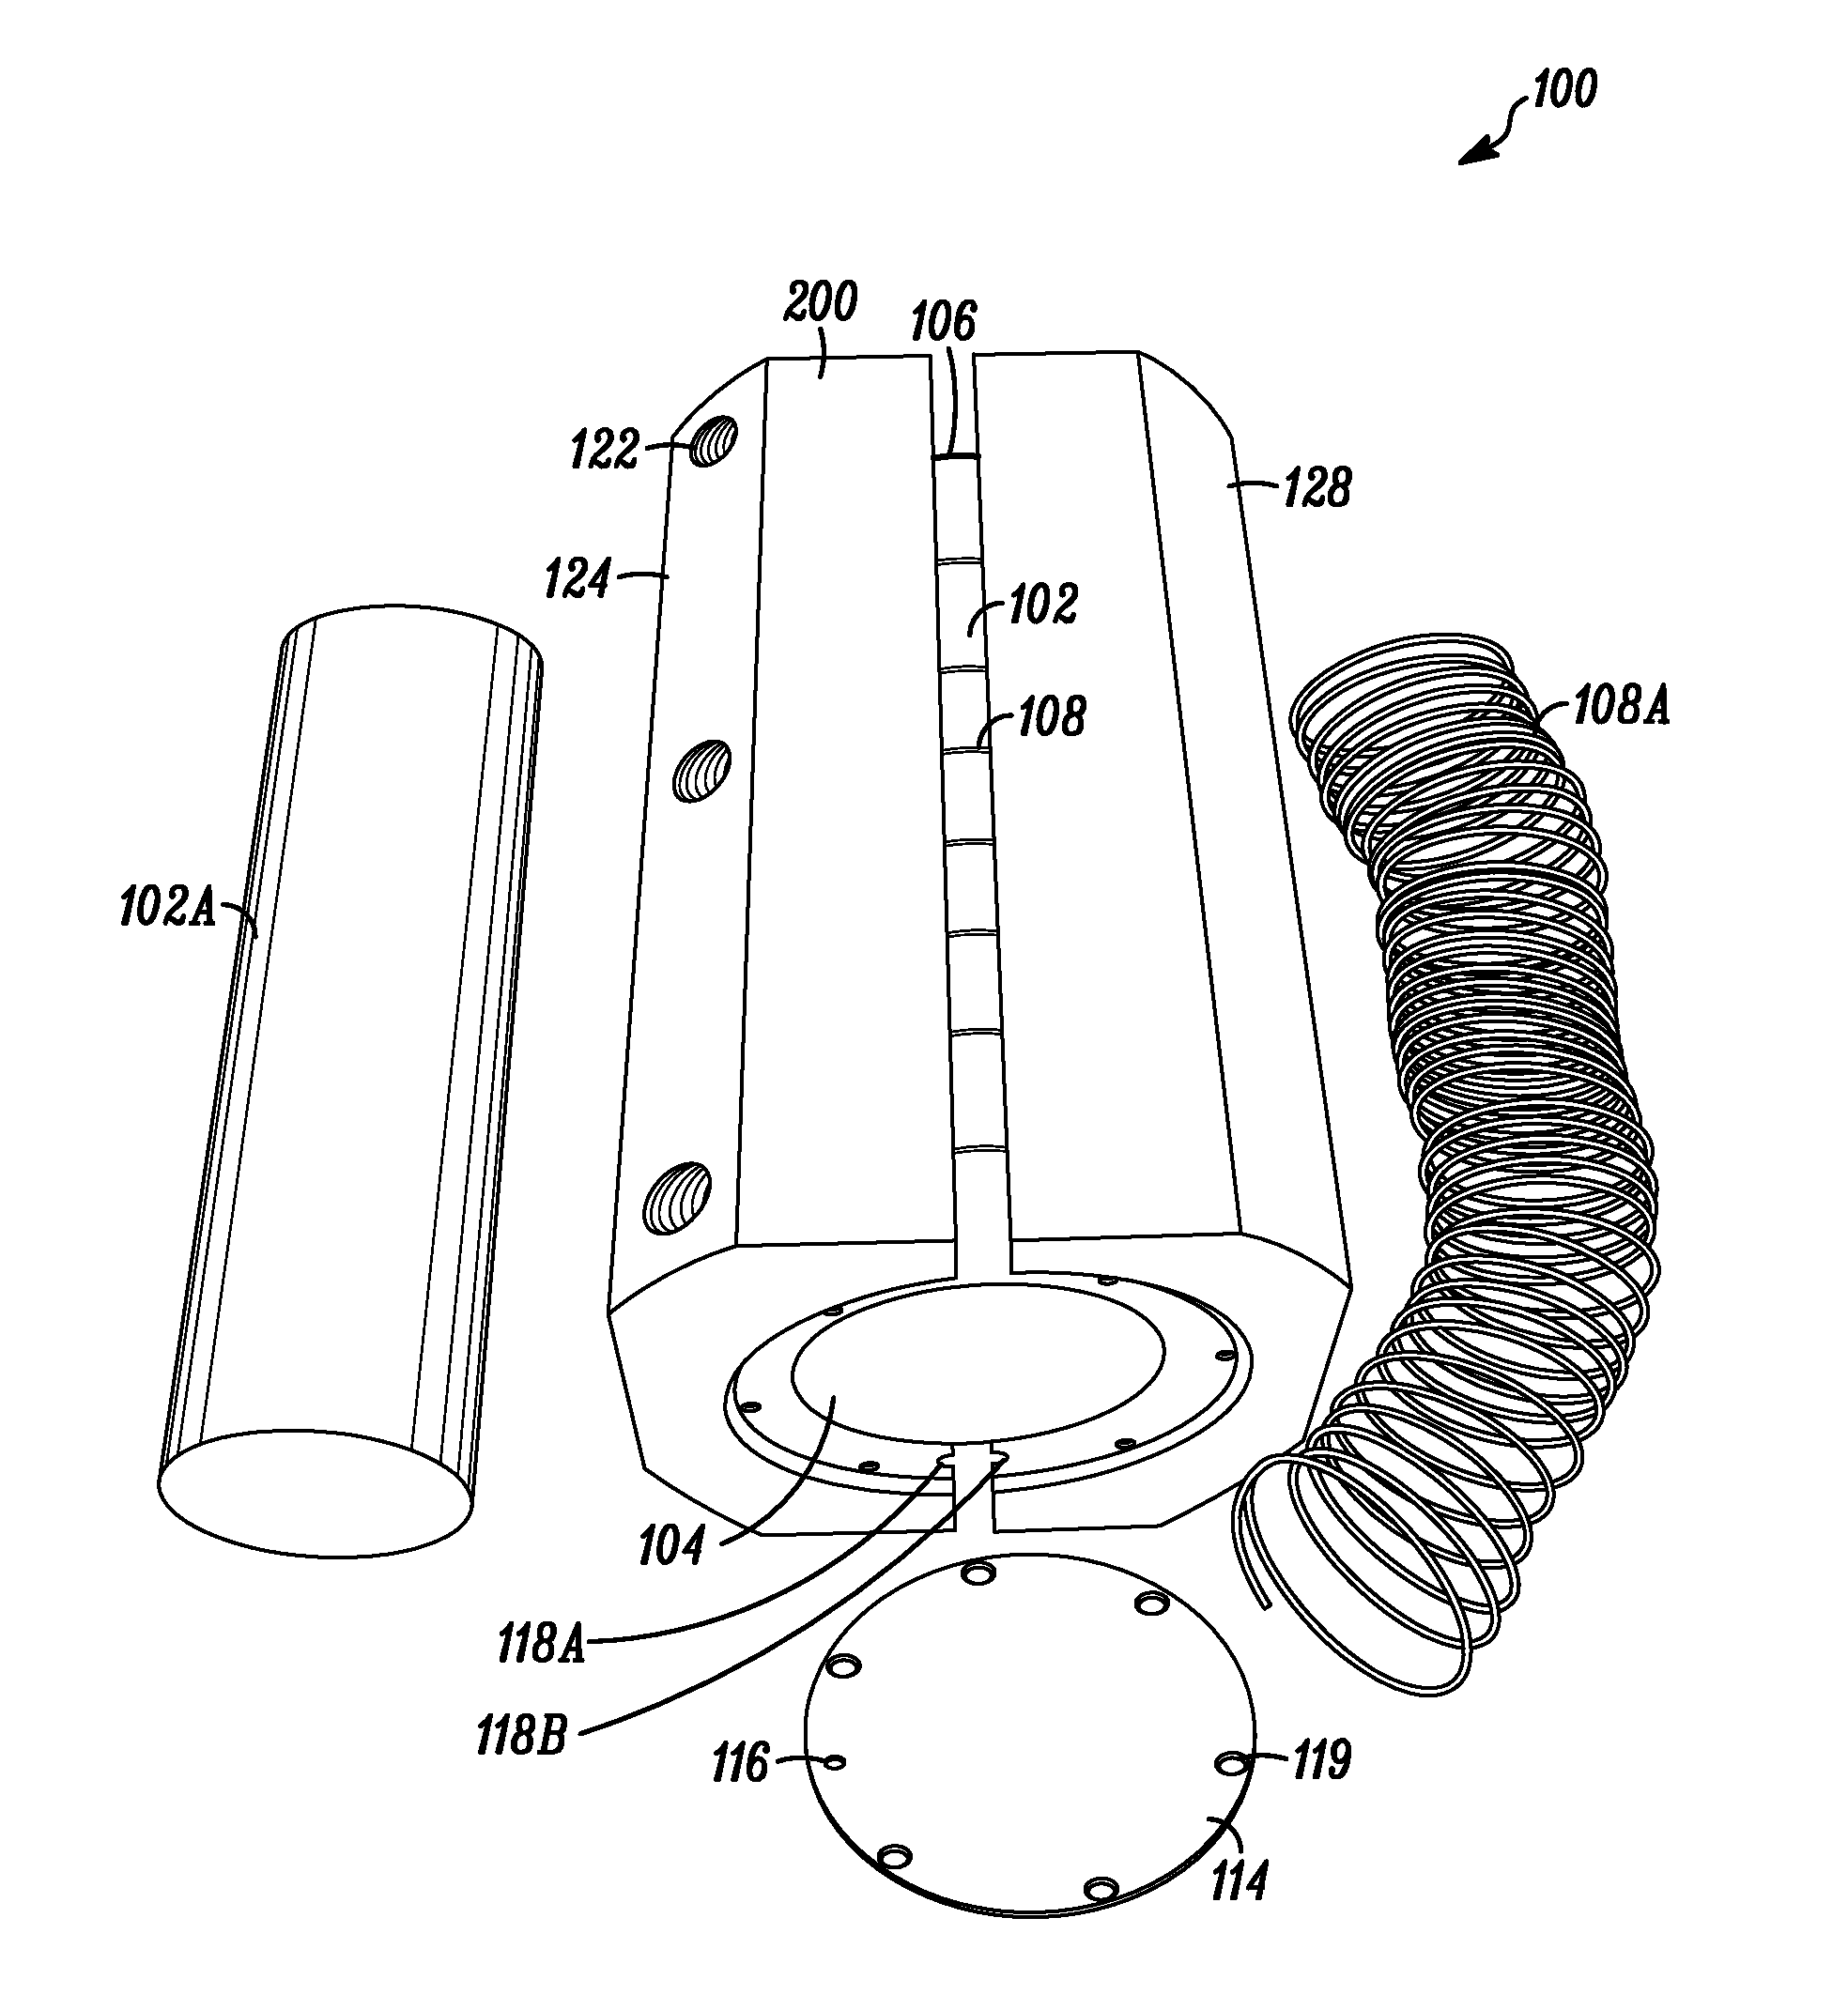 Process and apparatus for continuous flow synthesis of nanocrystals